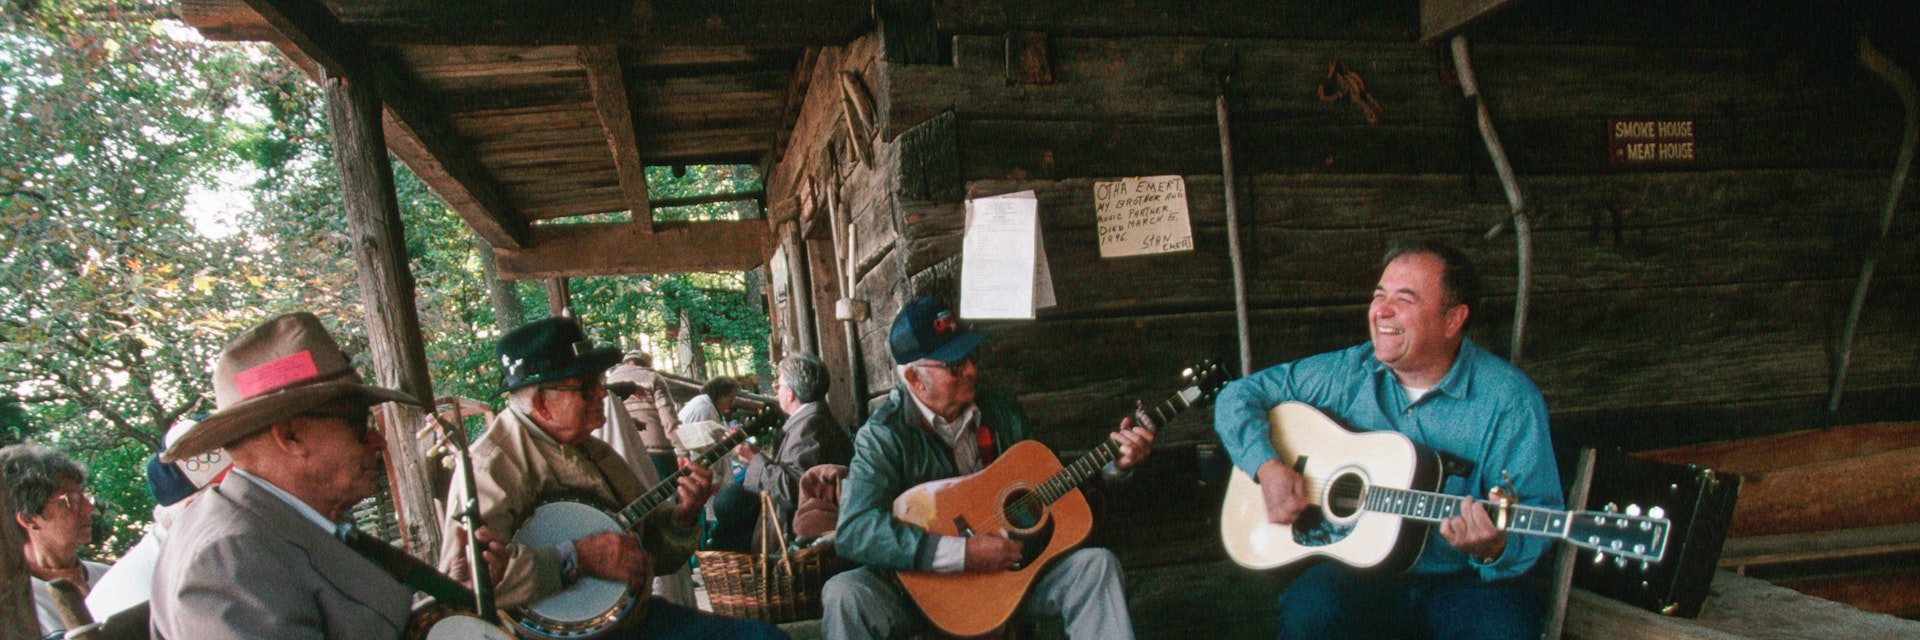 Banjoists and guitar players jam on the porch of the Museum of Appalachia during the Tennessee Fall Homecoming festival. | Location: Norris, Tennessee, USA.